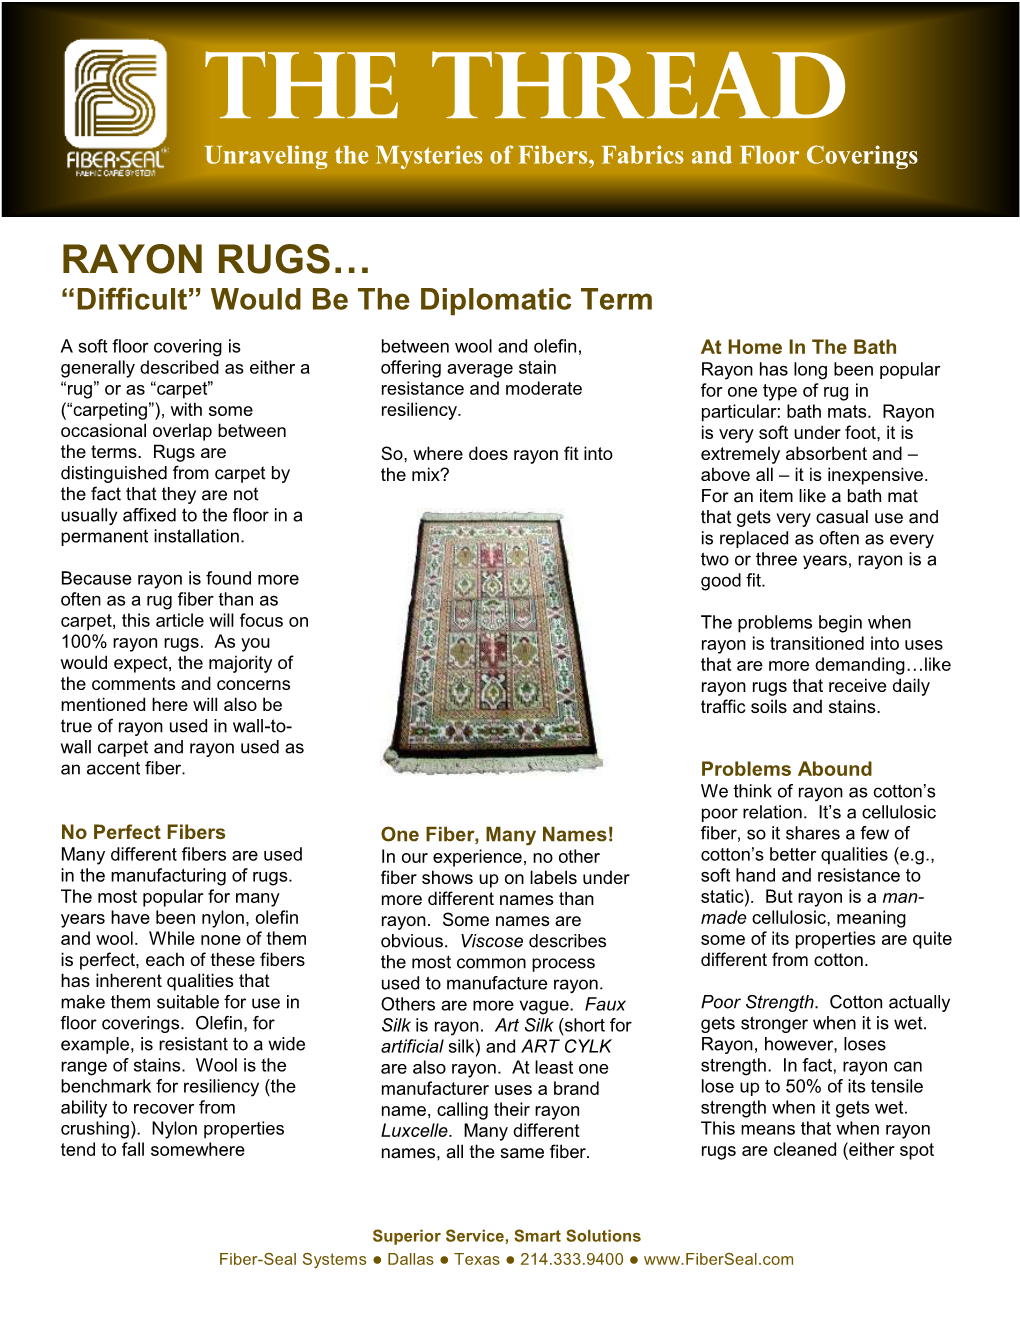 RAYON RUGS… “Difficult” Would Be the Diplomatic Term